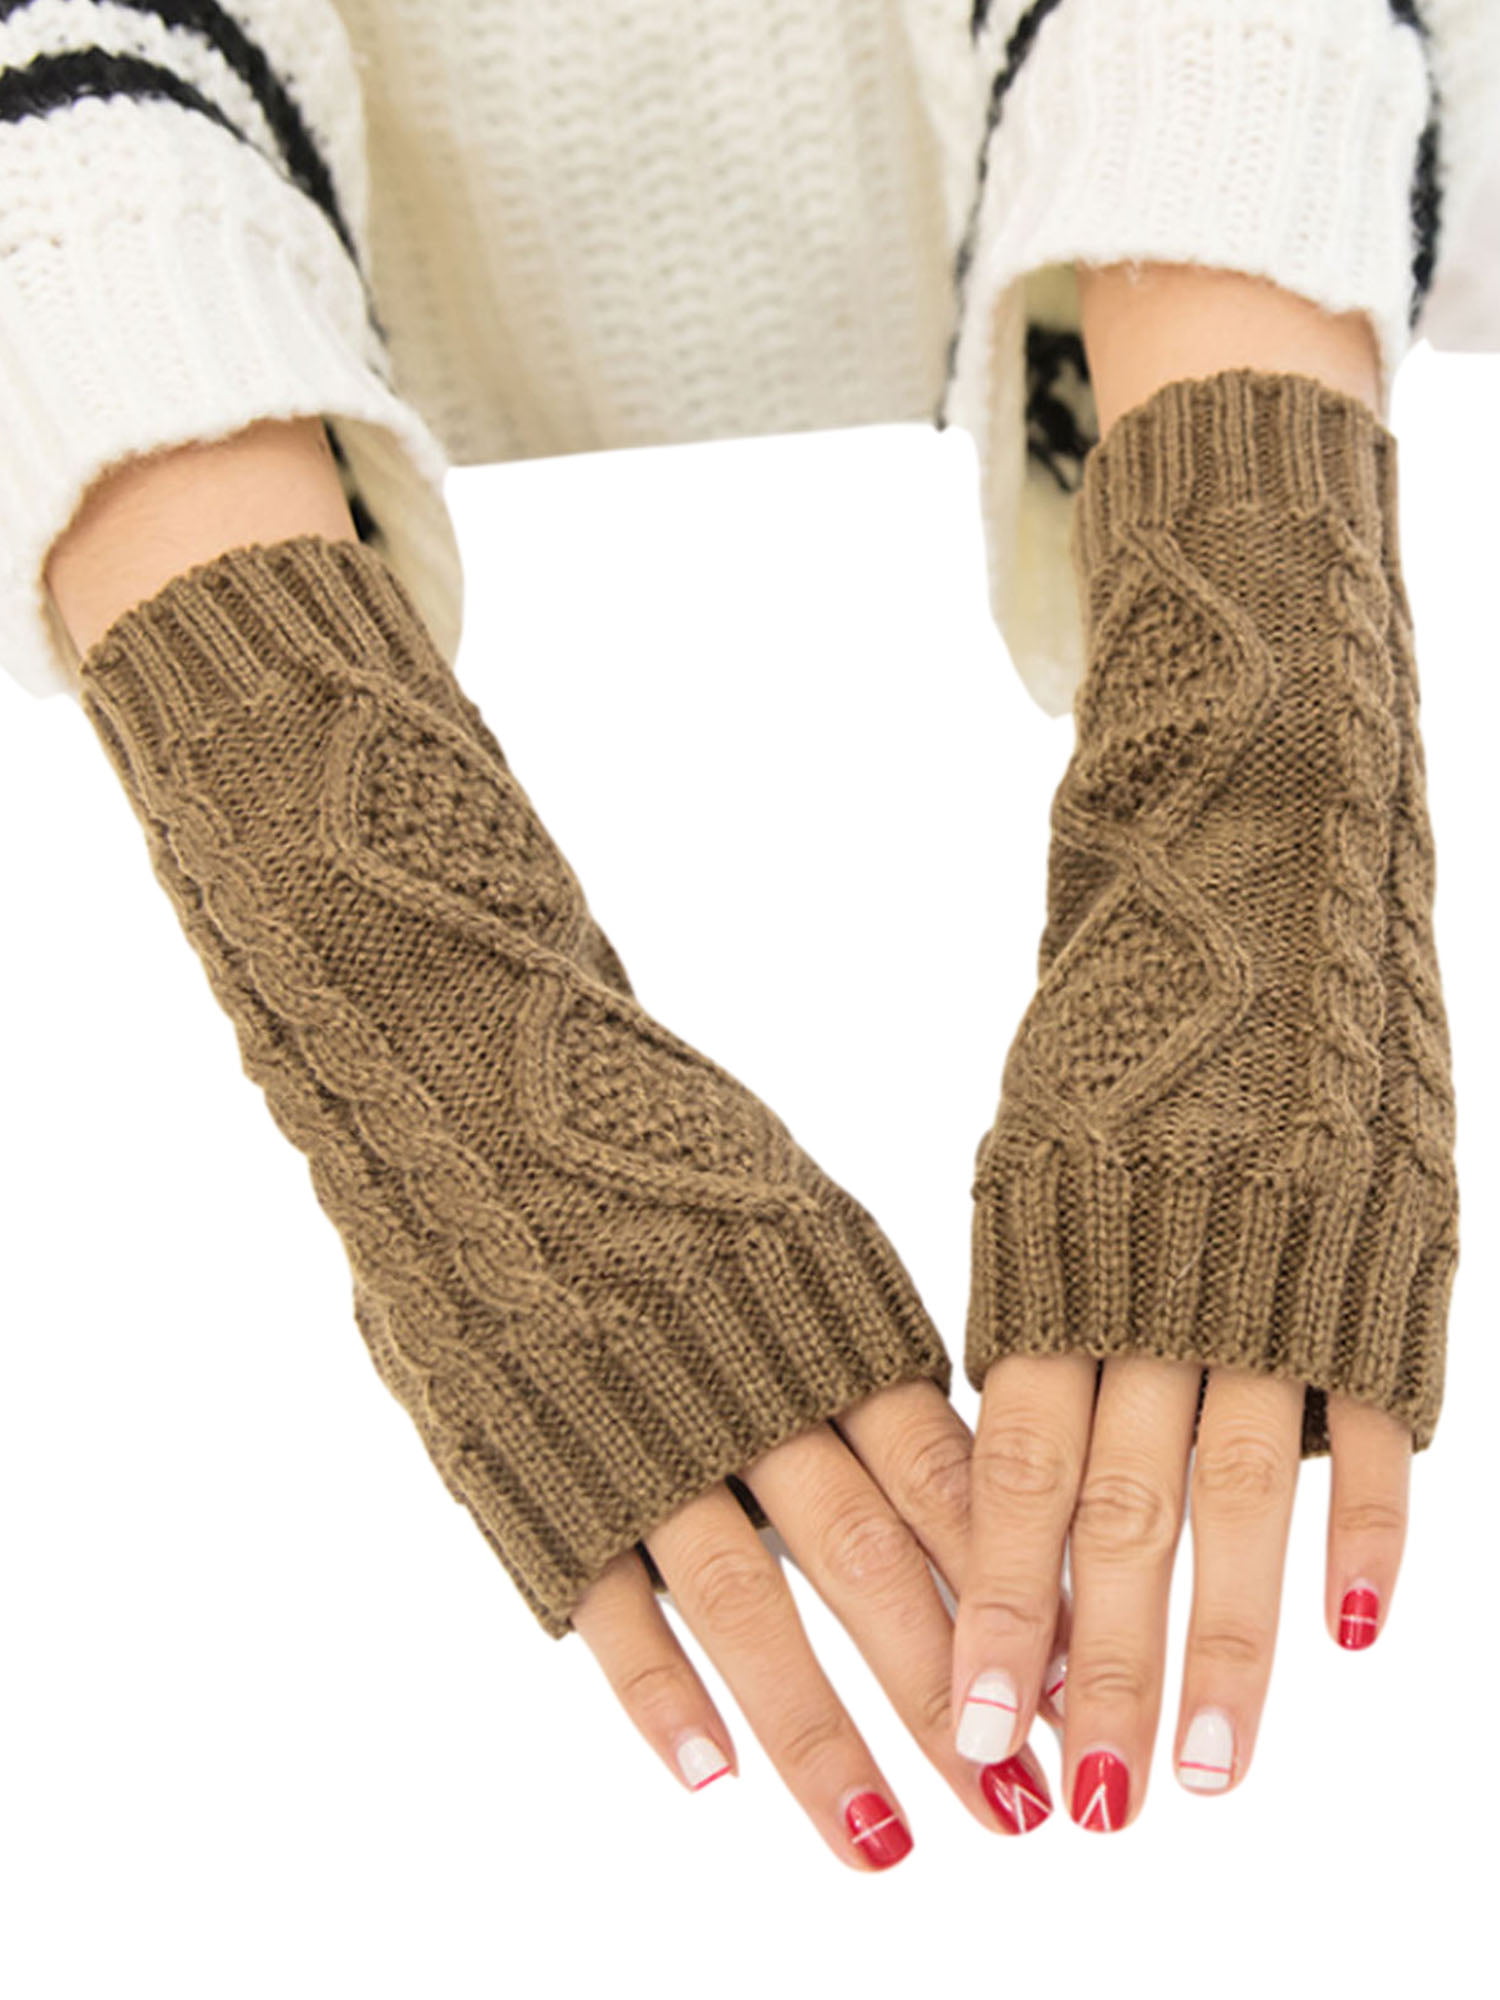 Winter Lady Protection Arm Warmer Long Fingerless Stretchy Gloves Sleeve Mittens 